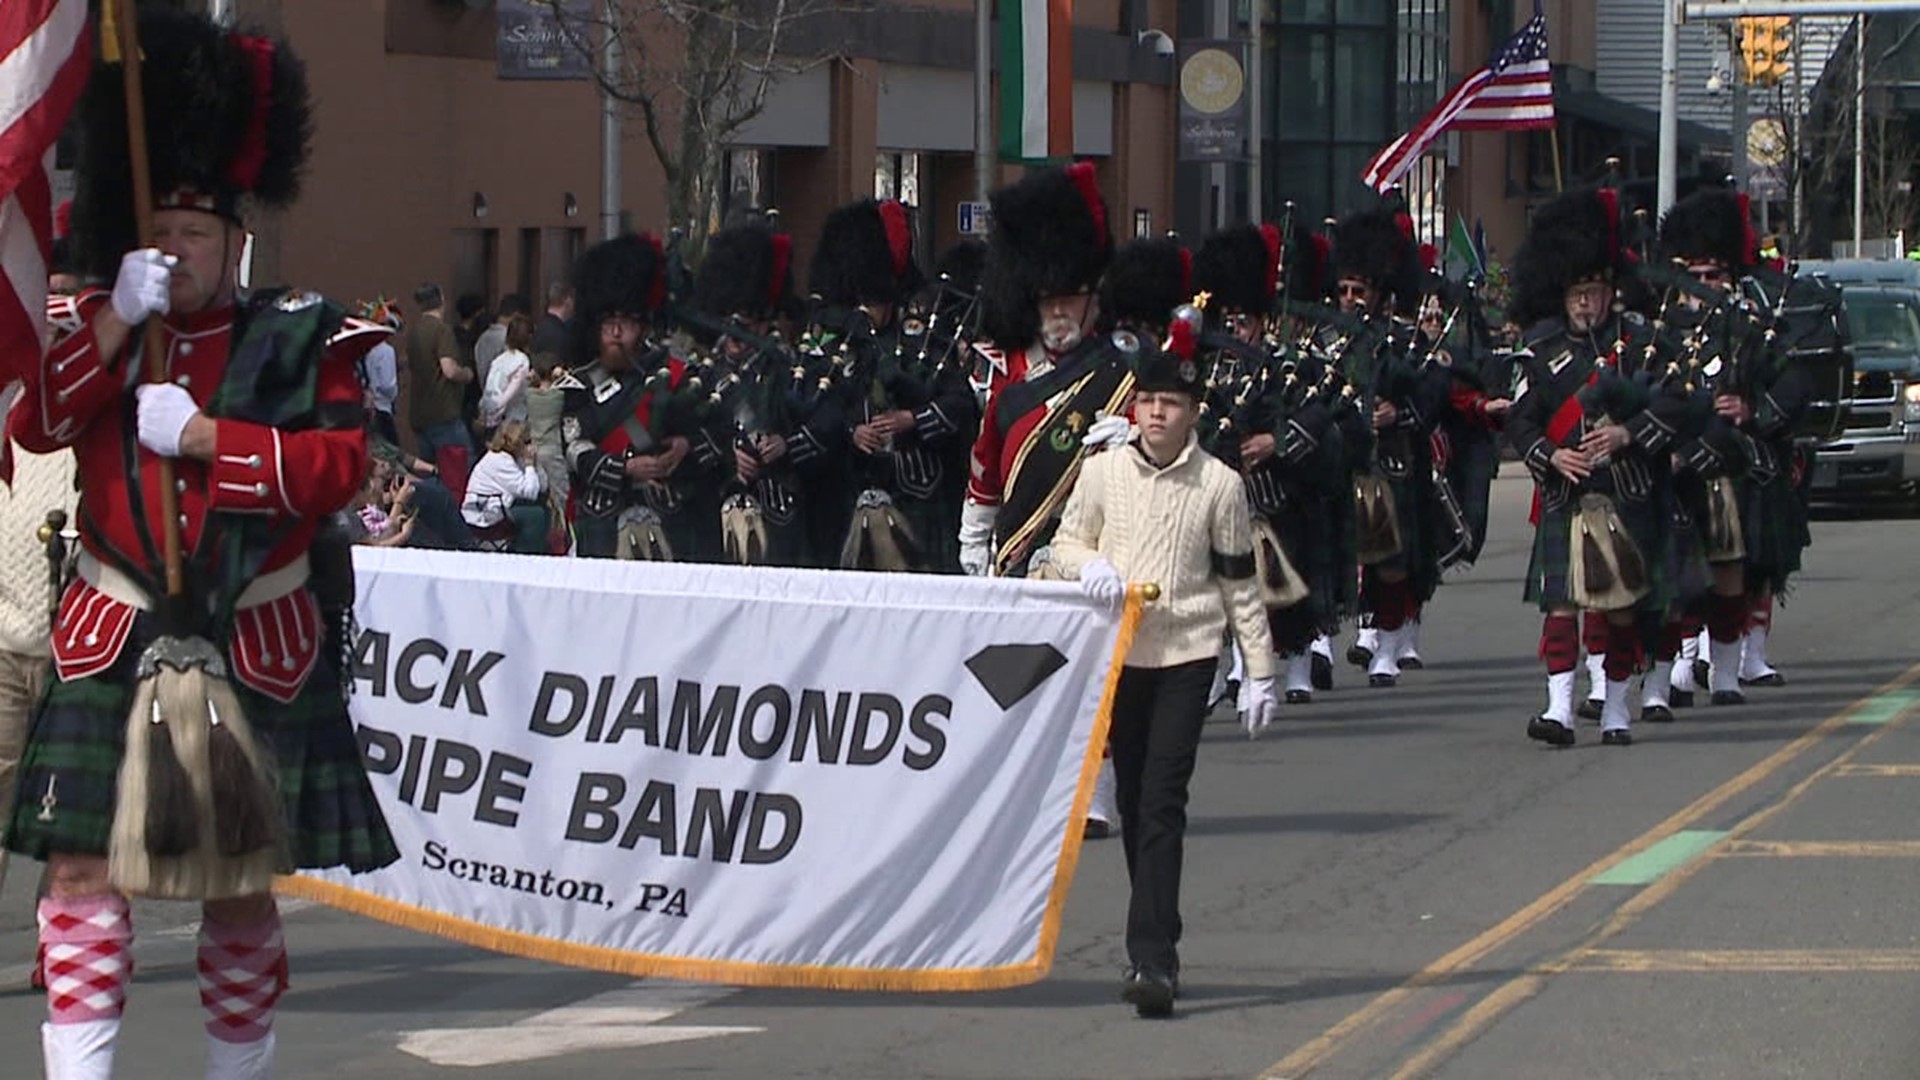 The city's annual St. Patrick's parade that hasn't been held since March of 2019 returned Saturday morning and folks were excited to be back.